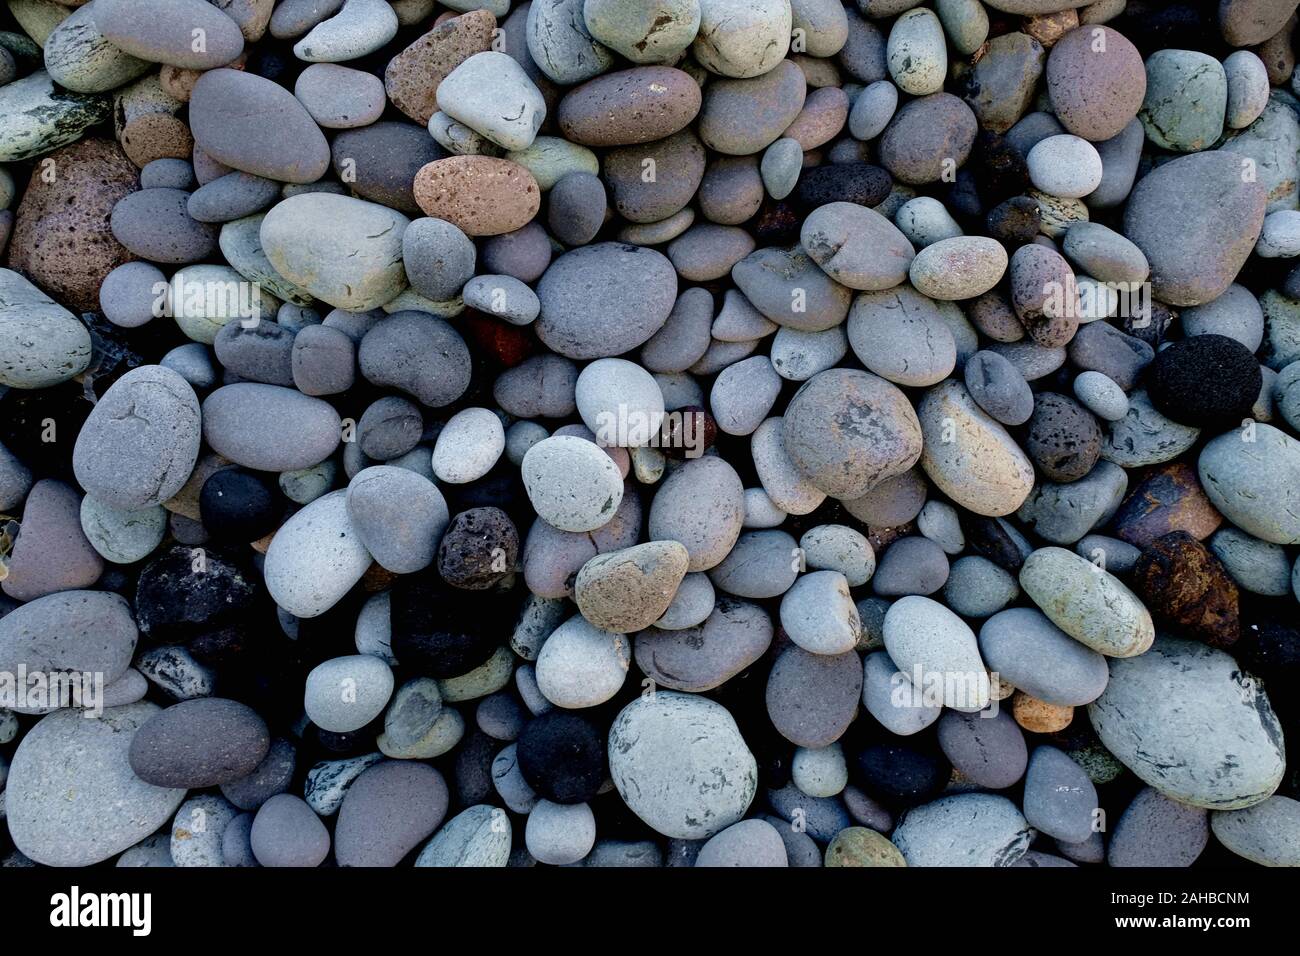 A collection of gray round stones, various sizes and shapes, various minerals, close view. Stock Photo